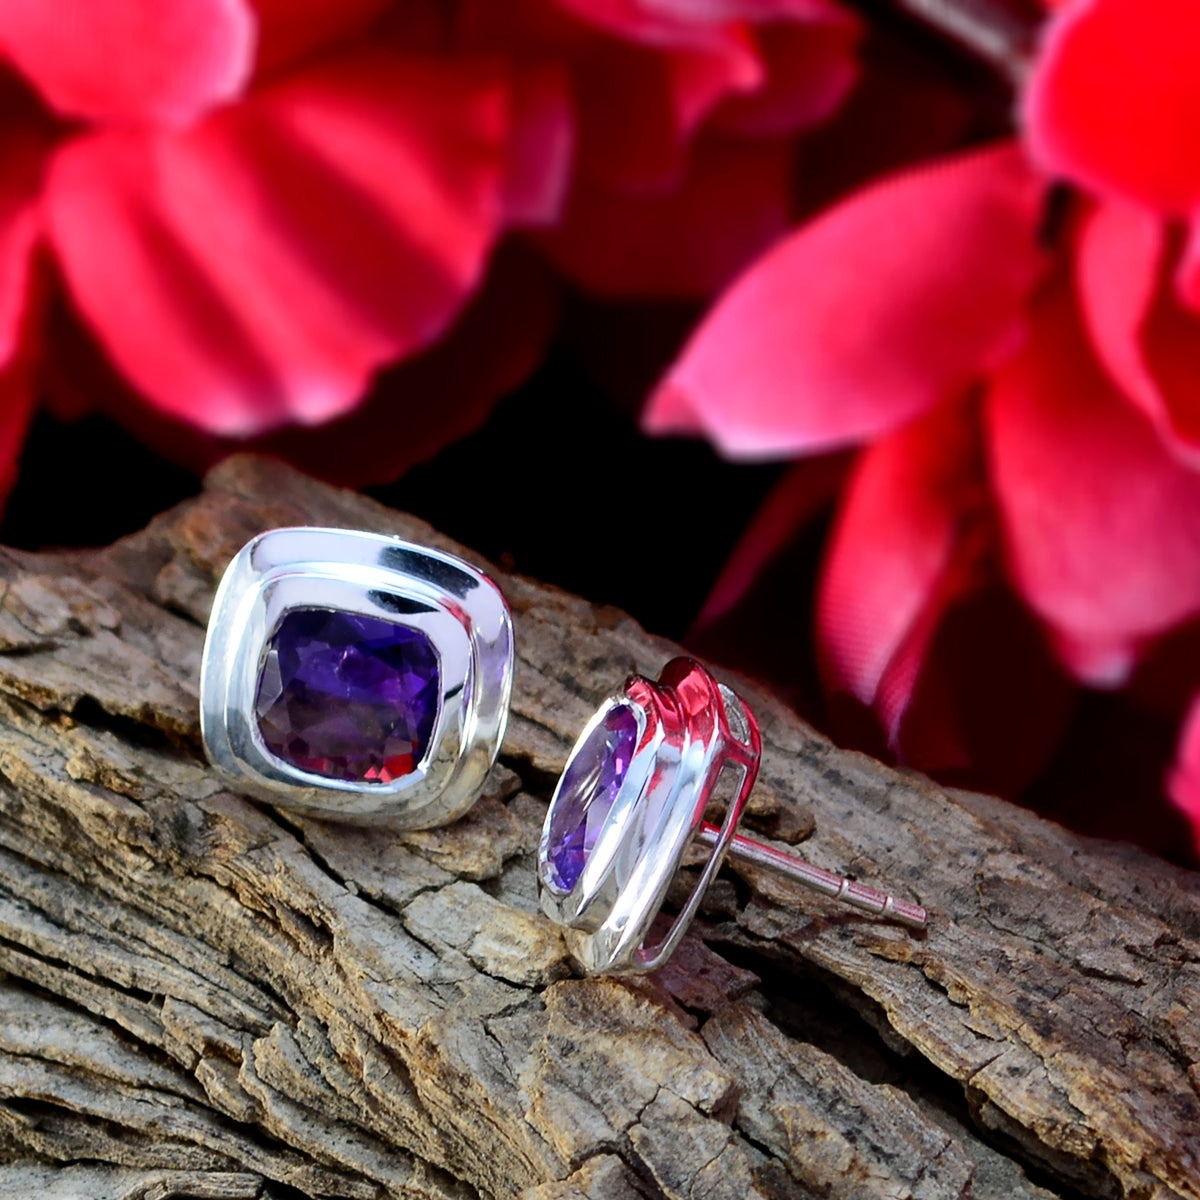 Riyo Real Gemstones Octogon Faceted Purple Amethyst Silver Earring independence day gift